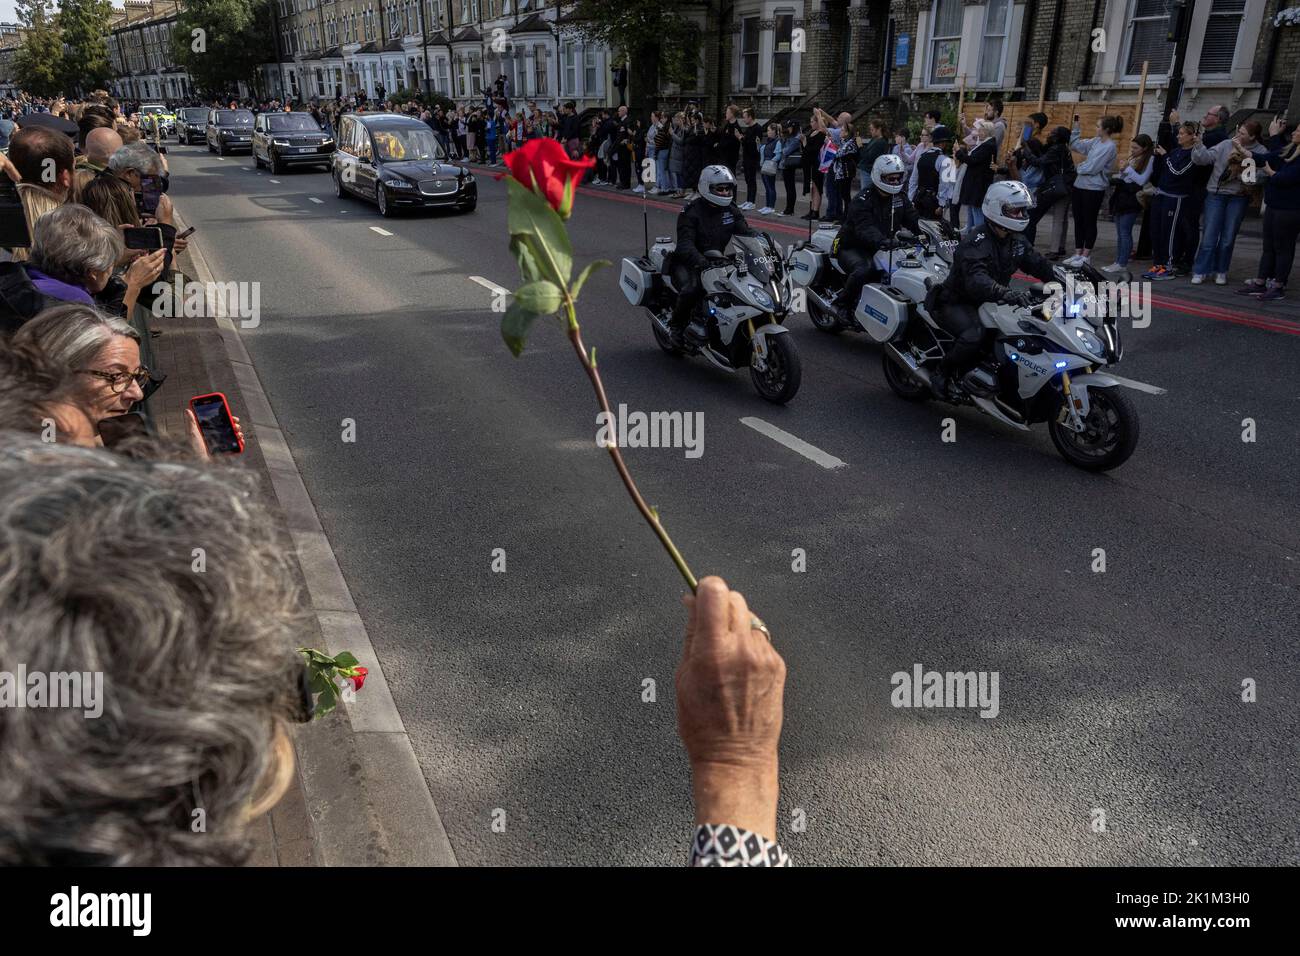 A person holds a flower, as Britain's Queen Elizabeth's coffin is transported, on the day of her state funeral and burial, in London, Britain, September 19, 2022. REUTERS/Carlos Barria Stock Photo